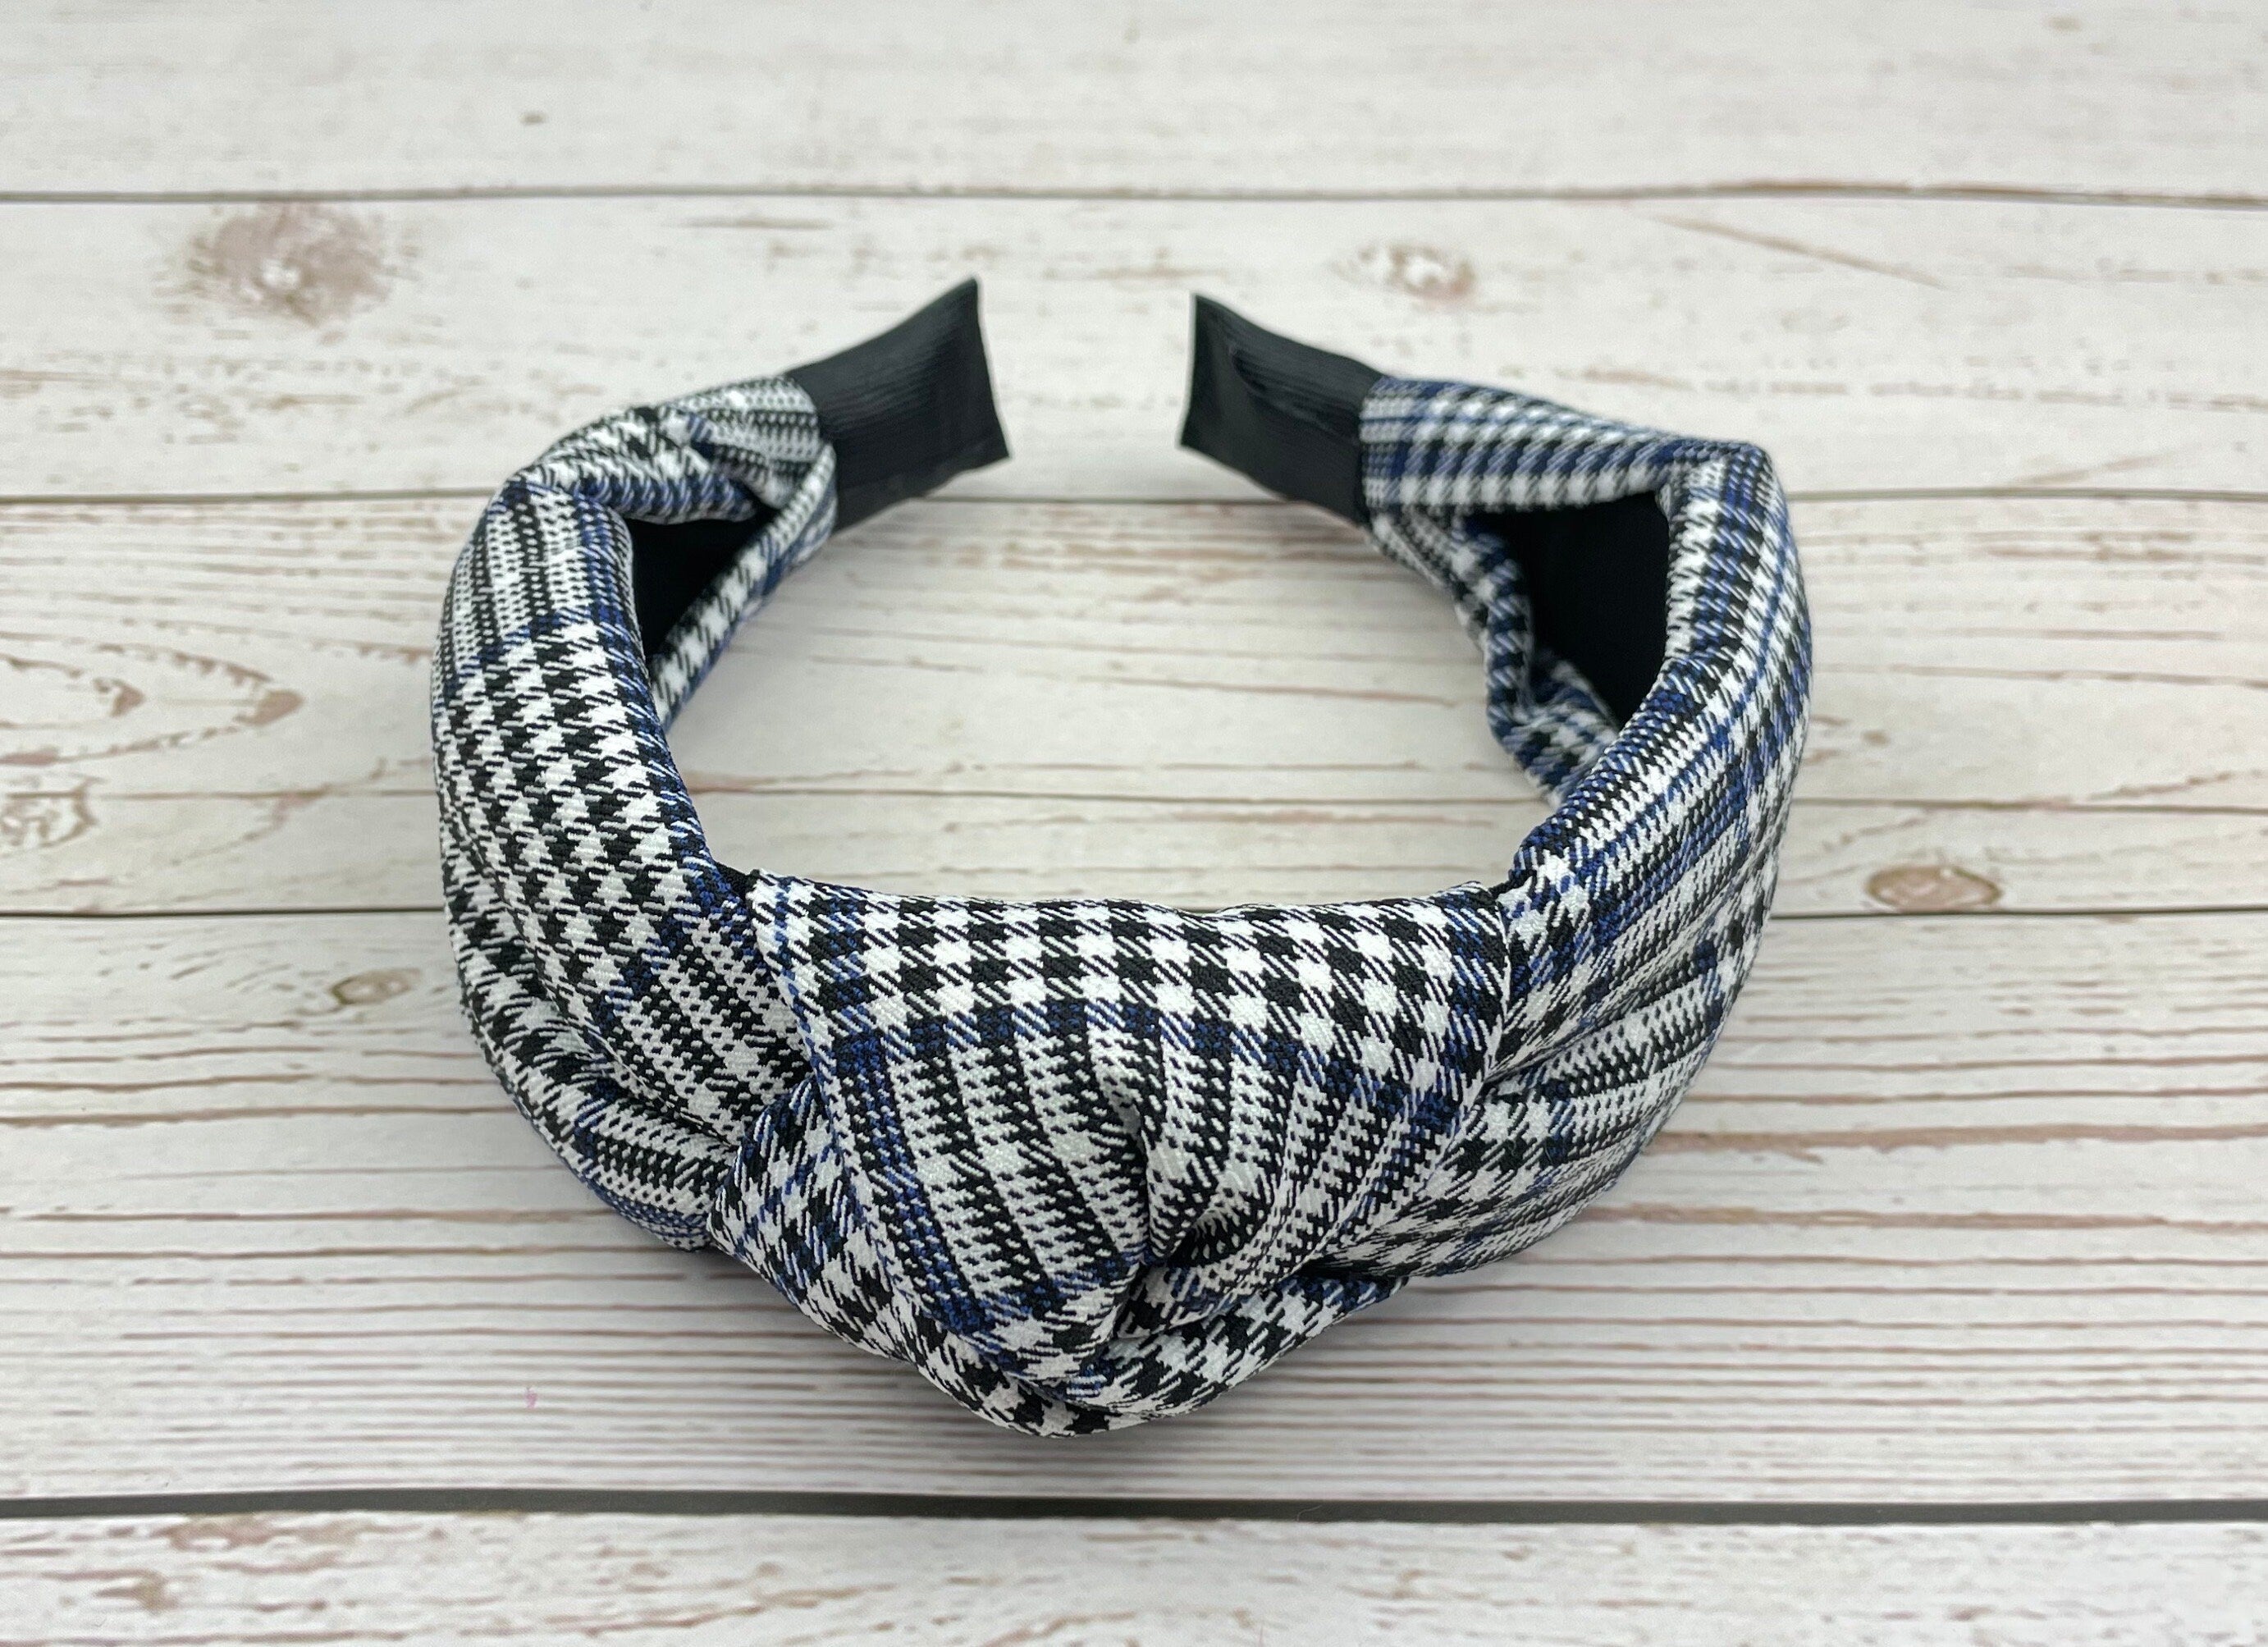 Versatile Crepe White and Black Headband with Dark Blue Stripes - Classic Hair Accessory for Women, Ideal for College Fashion